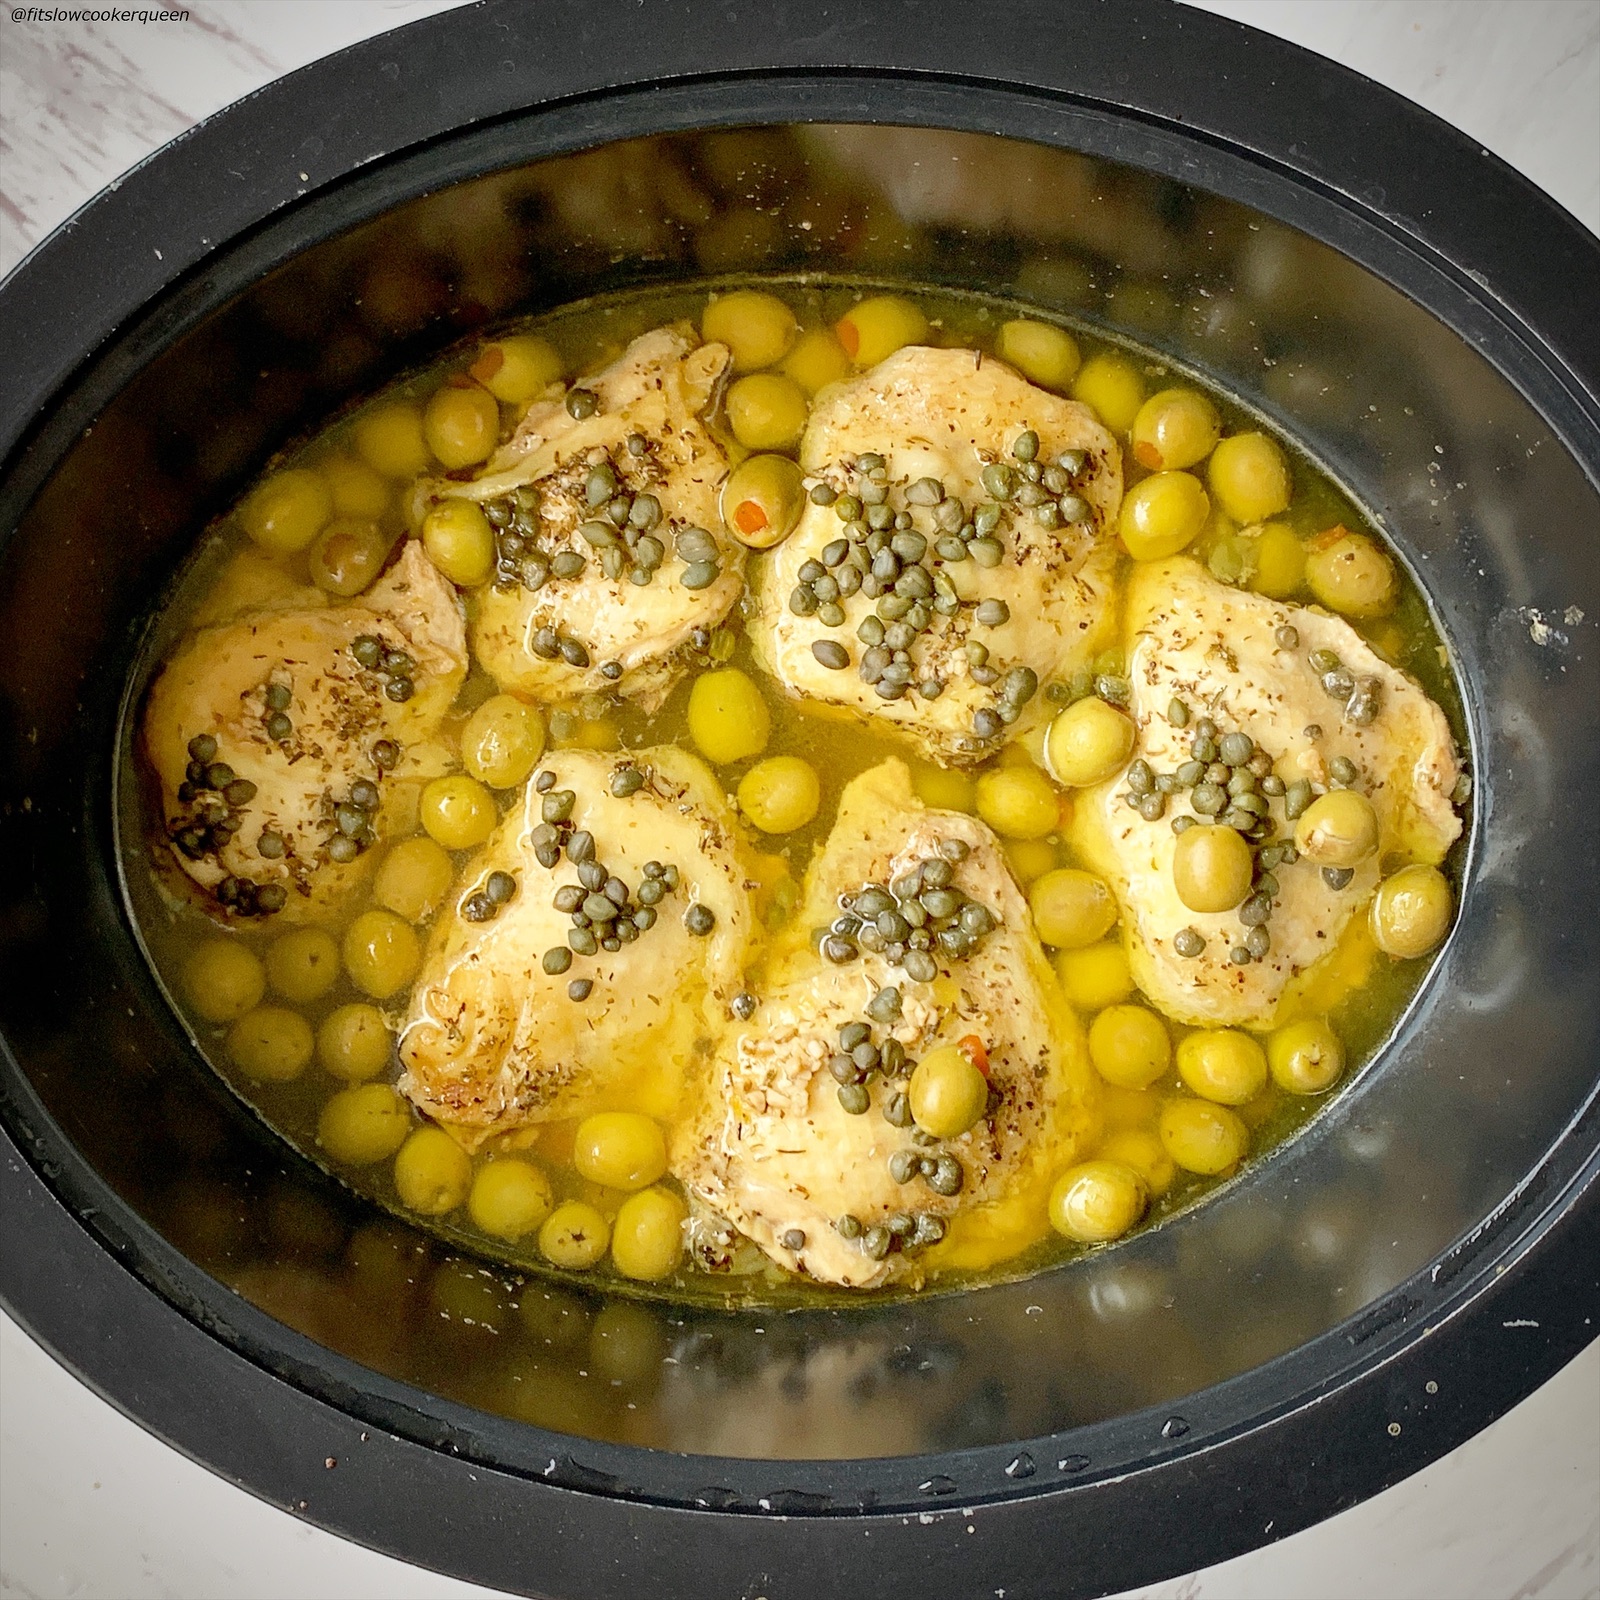 after pic of cooked food in the slow cooker for Slow Cooker Instant Pot Chicken, Olives & Capers (Low-Carb, Paleo, Whole30) 